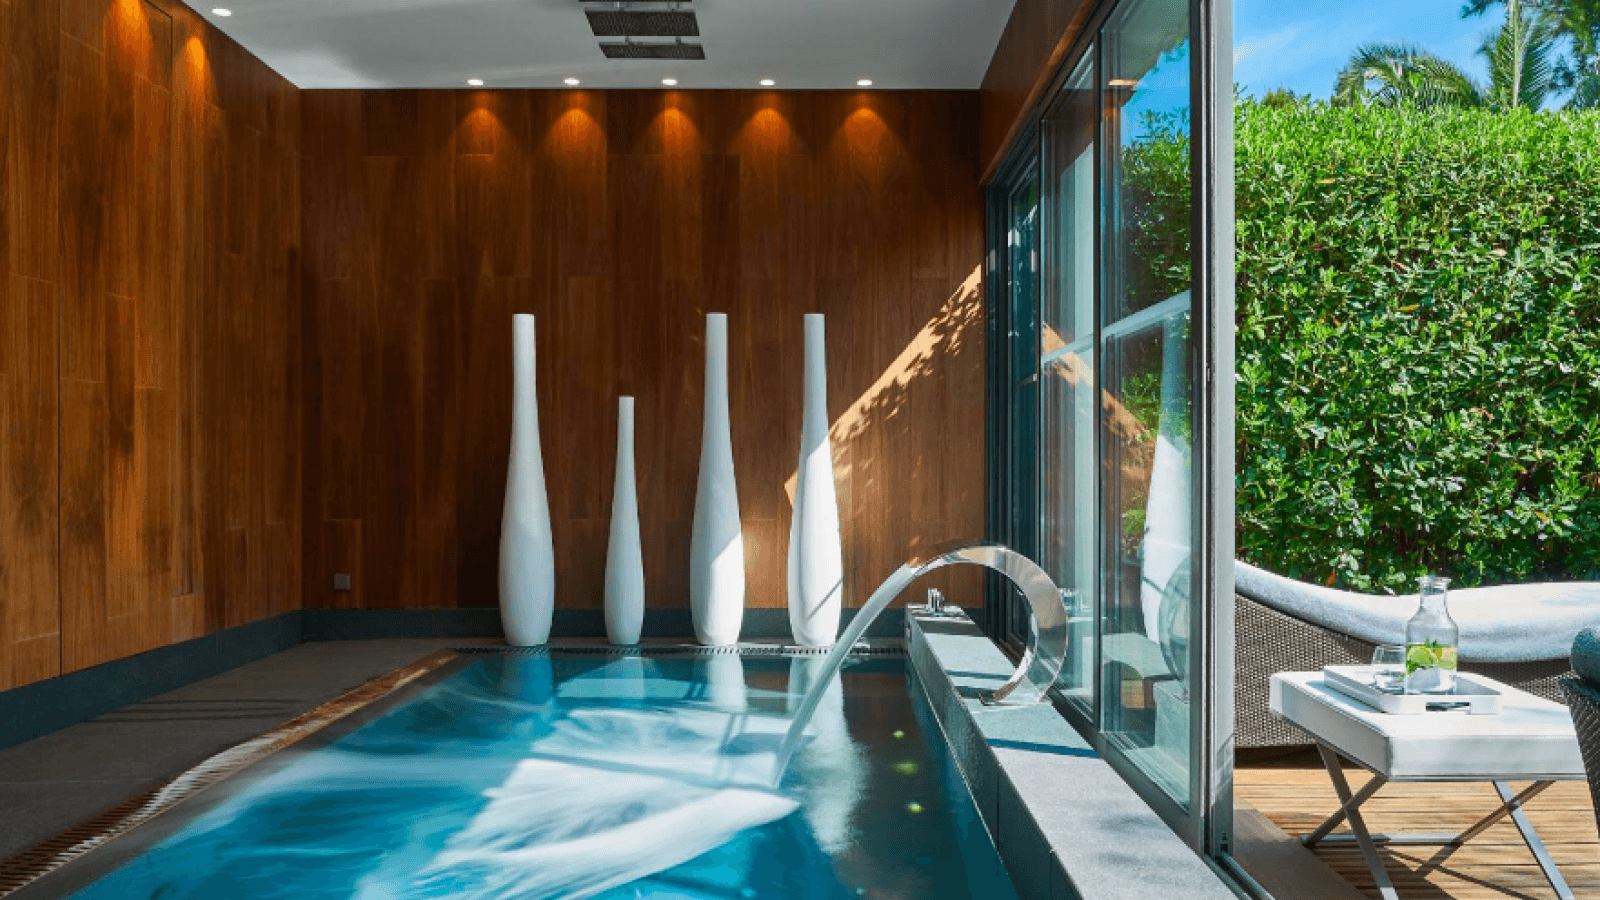 Relaxation for two at the Spa Sezz by Cinq Mondes